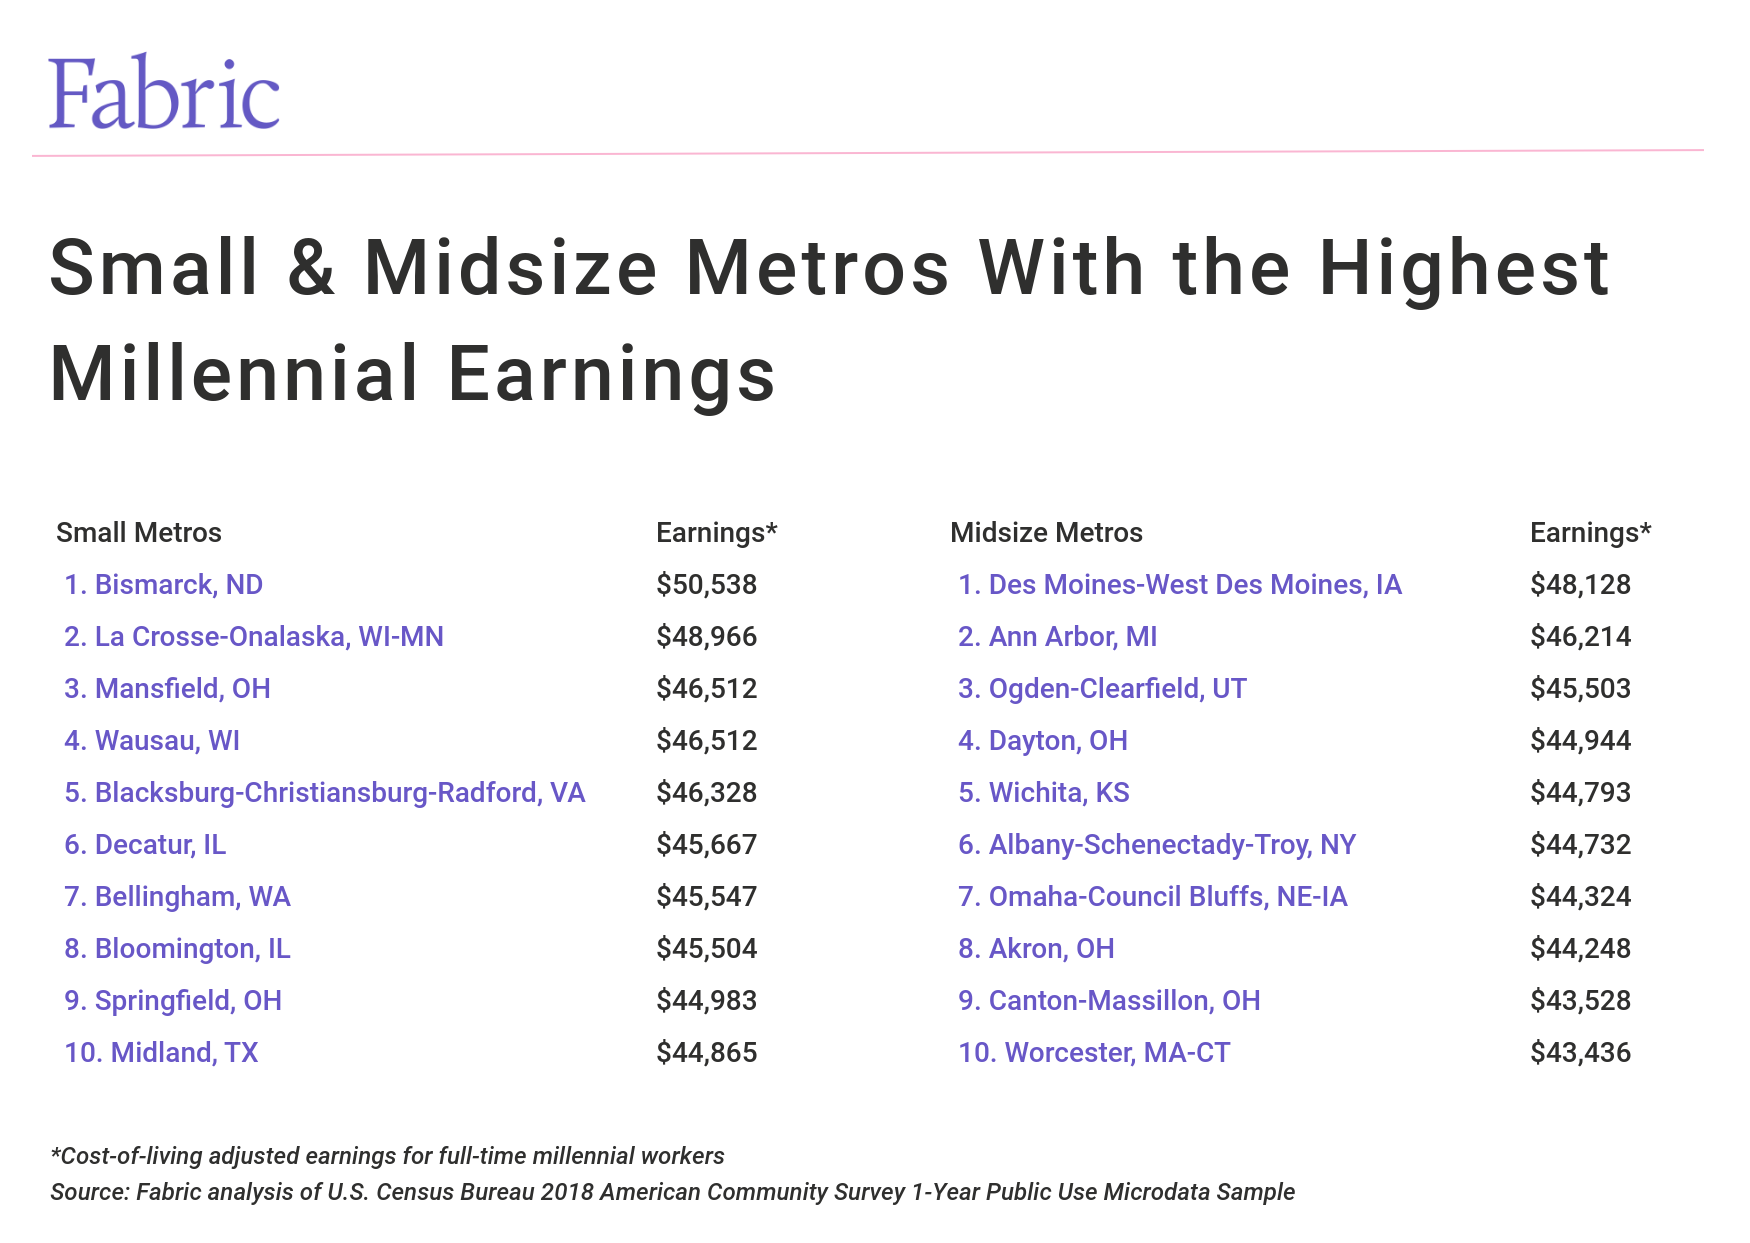 A list of small and midsize metropolitan areas with the best salaries for millennials; Bismarck, ND tops the list for small metros and Des Moines, IA tops the midsize metros.